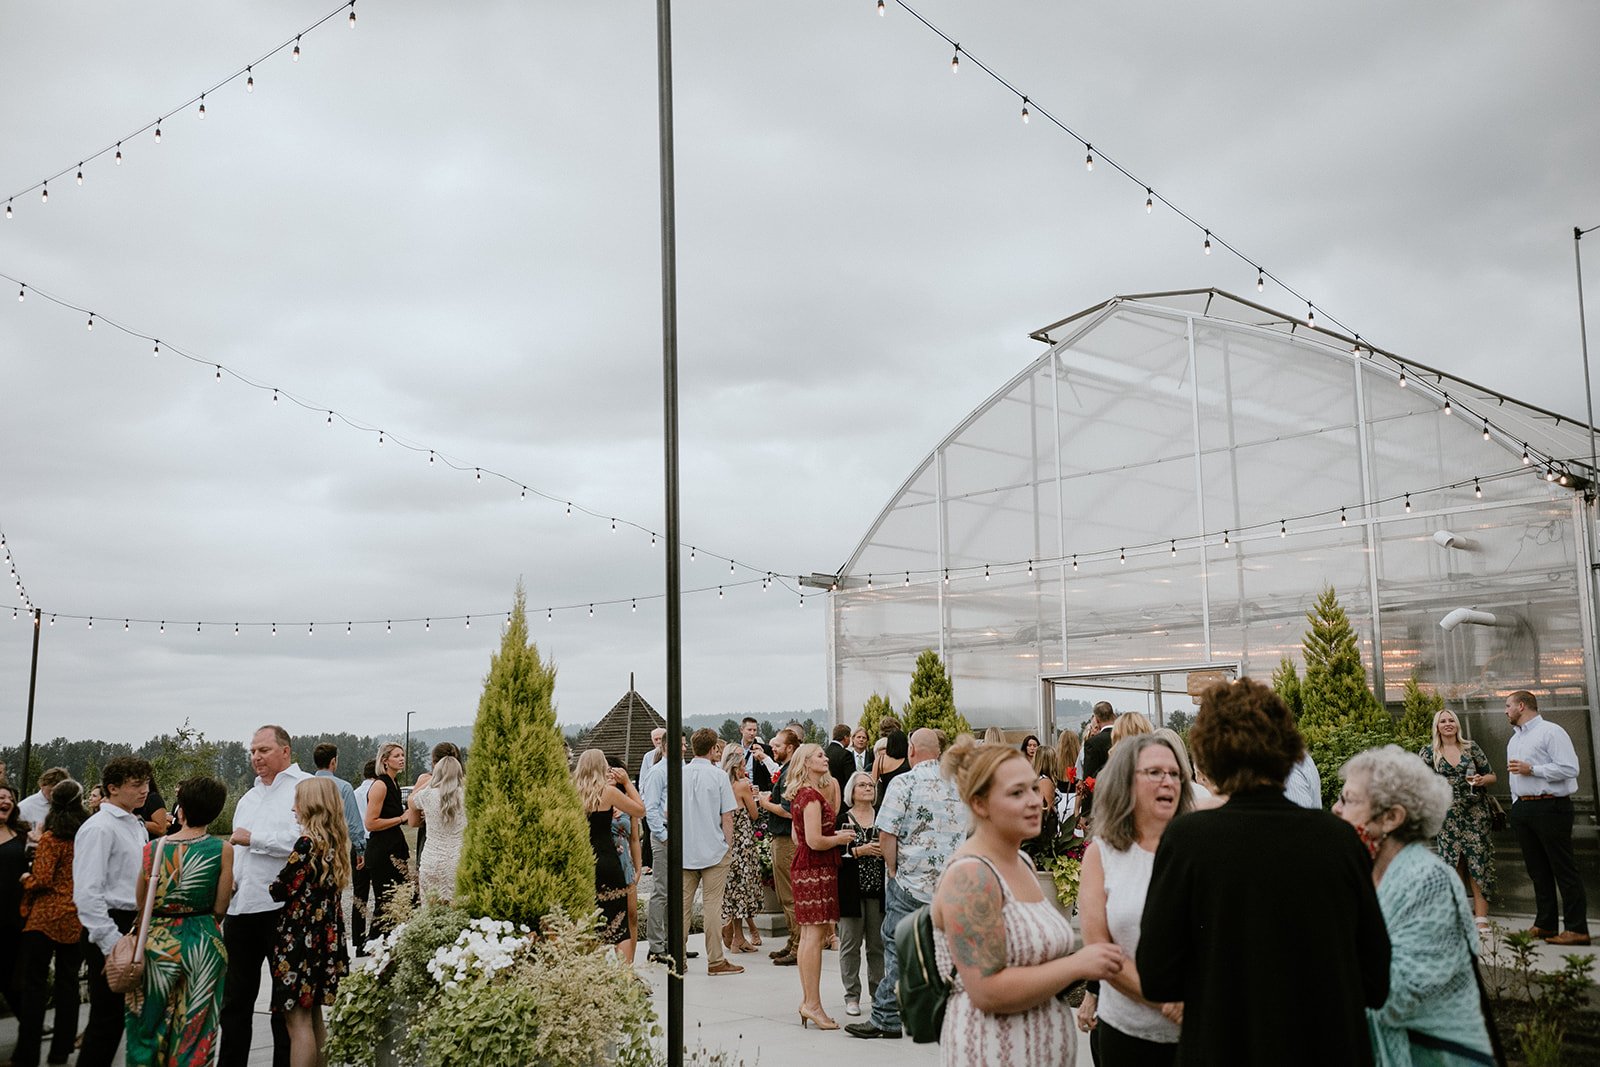  “From the bottom of our hearts, Joe and I want to thank Farm 12 for hosting such a wonderful wedding. We had a lovely day and received SO many compliments on the service, food and venue! All of our guests loved it!”   - Joe and Grace F. 